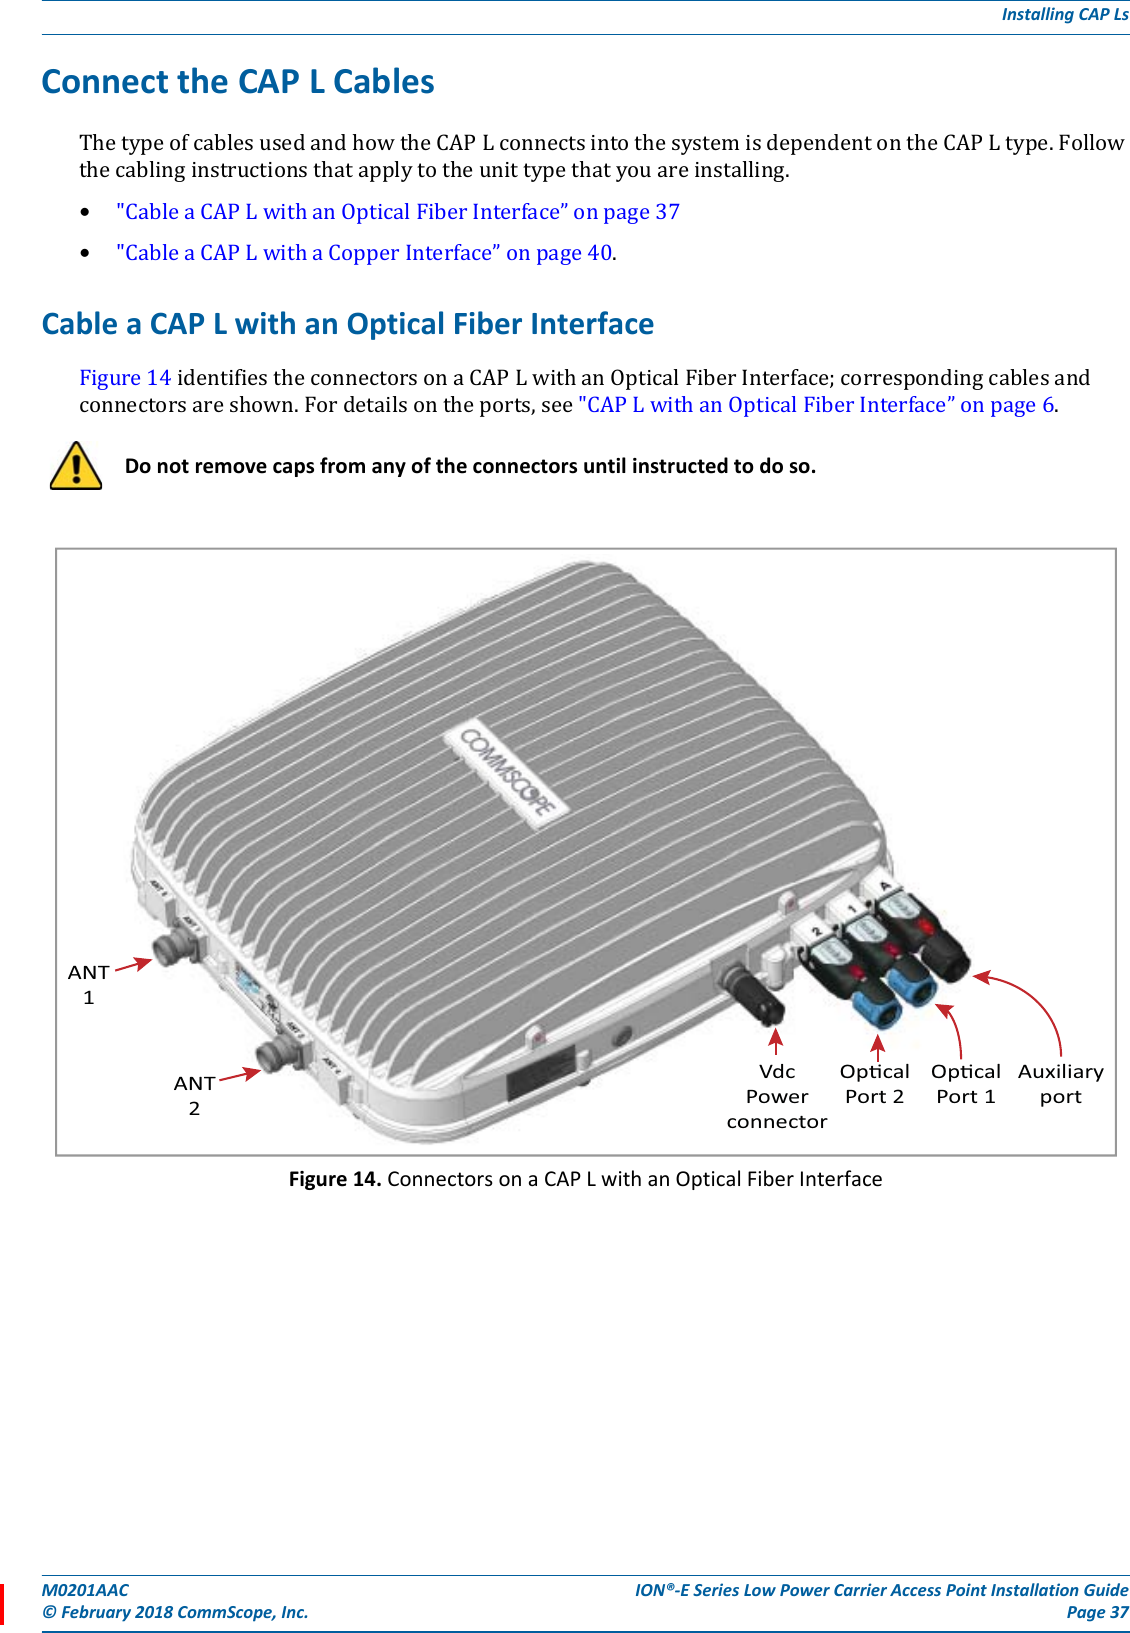 M0201AAC ION®-E Series Low Power Carrier Access Point Installation Guide© February 2018 CommScope, Inc. Page 37Installing CAP LsConnect the CAP L CablesThetypeofcablesusedandhowtheCAPLconnectsintothesystemisdependentontheCAPLtype.Followthecablinginstructionsthatapplytotheunittypethatyouareinstalling.•&quot;CableaCAPLwithanOpticalFiberInterface”onpage37•&quot;CableaCAPLwithaCopperInterface”onpage40.Cable a CAP L with an Optical Fiber InterfaceFigure14identifiestheconnectorsonaCAPLwithanOpticalFiberInterface;correspondingcablesandconnectorsareshown.Fordetailsontheports,see&quot;CAPLwithanOpticalFiberInterface”onpage6.Figure 14. Connectors on a CAP L with an Optical Fiber InterfaceDo not remove caps from any of the connectors until instructed to do so.ANT1ANT2VdcPowerconnectorOpcalPort 2OpcalPort 1Auxiliaryport